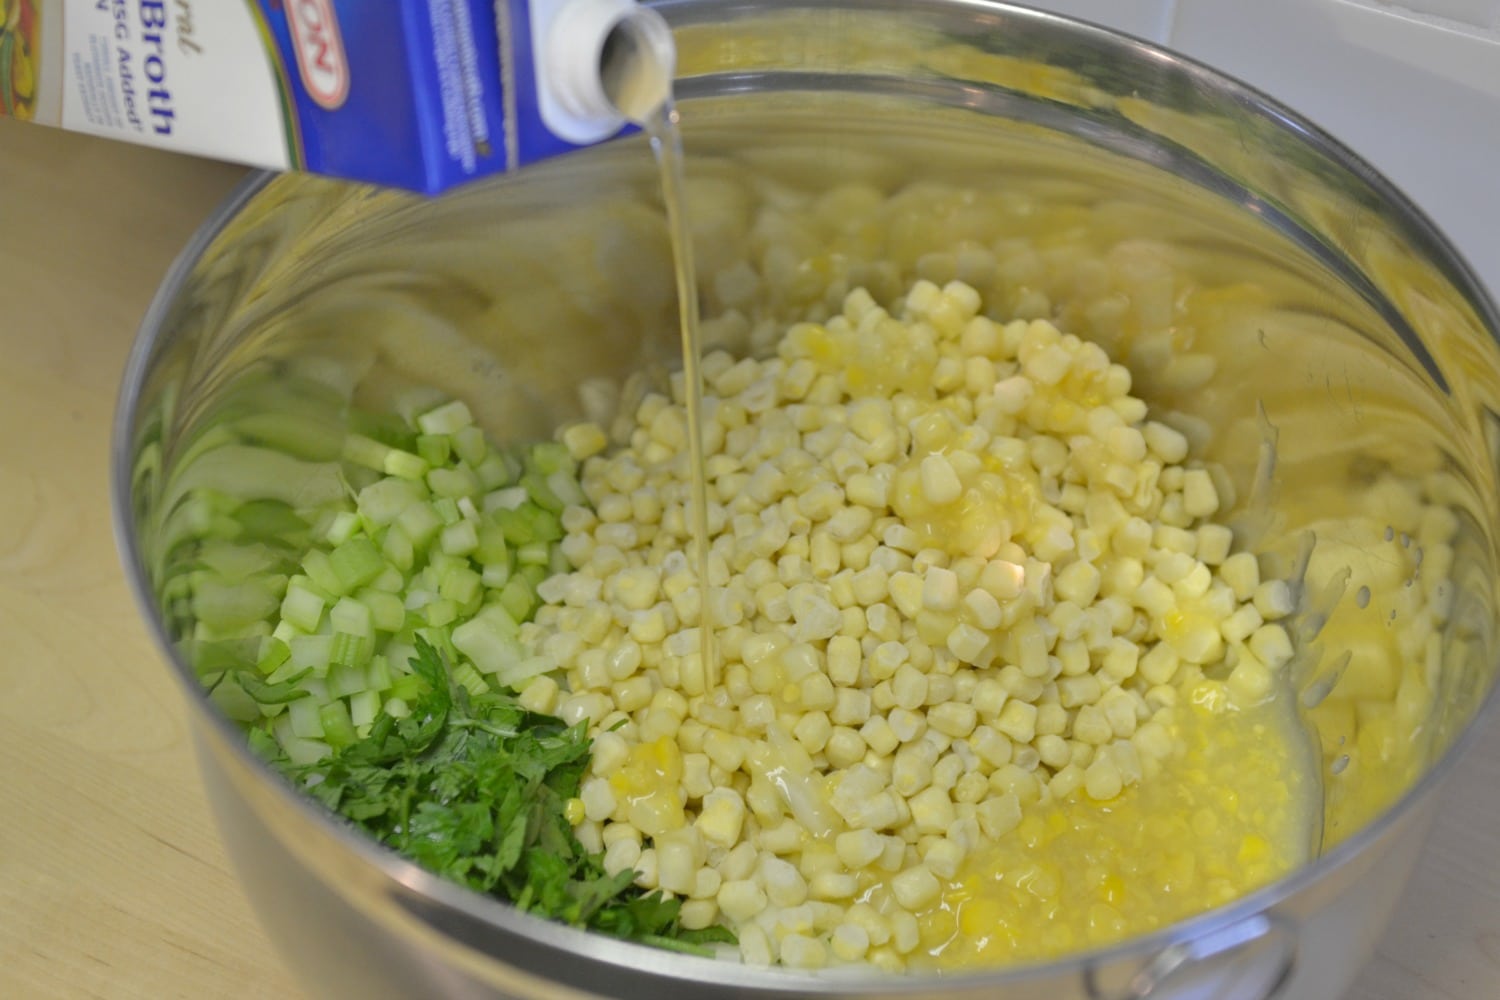 In large bowl, mix together onions, parsley, celery, creamed corn, frozen corn, and broth.